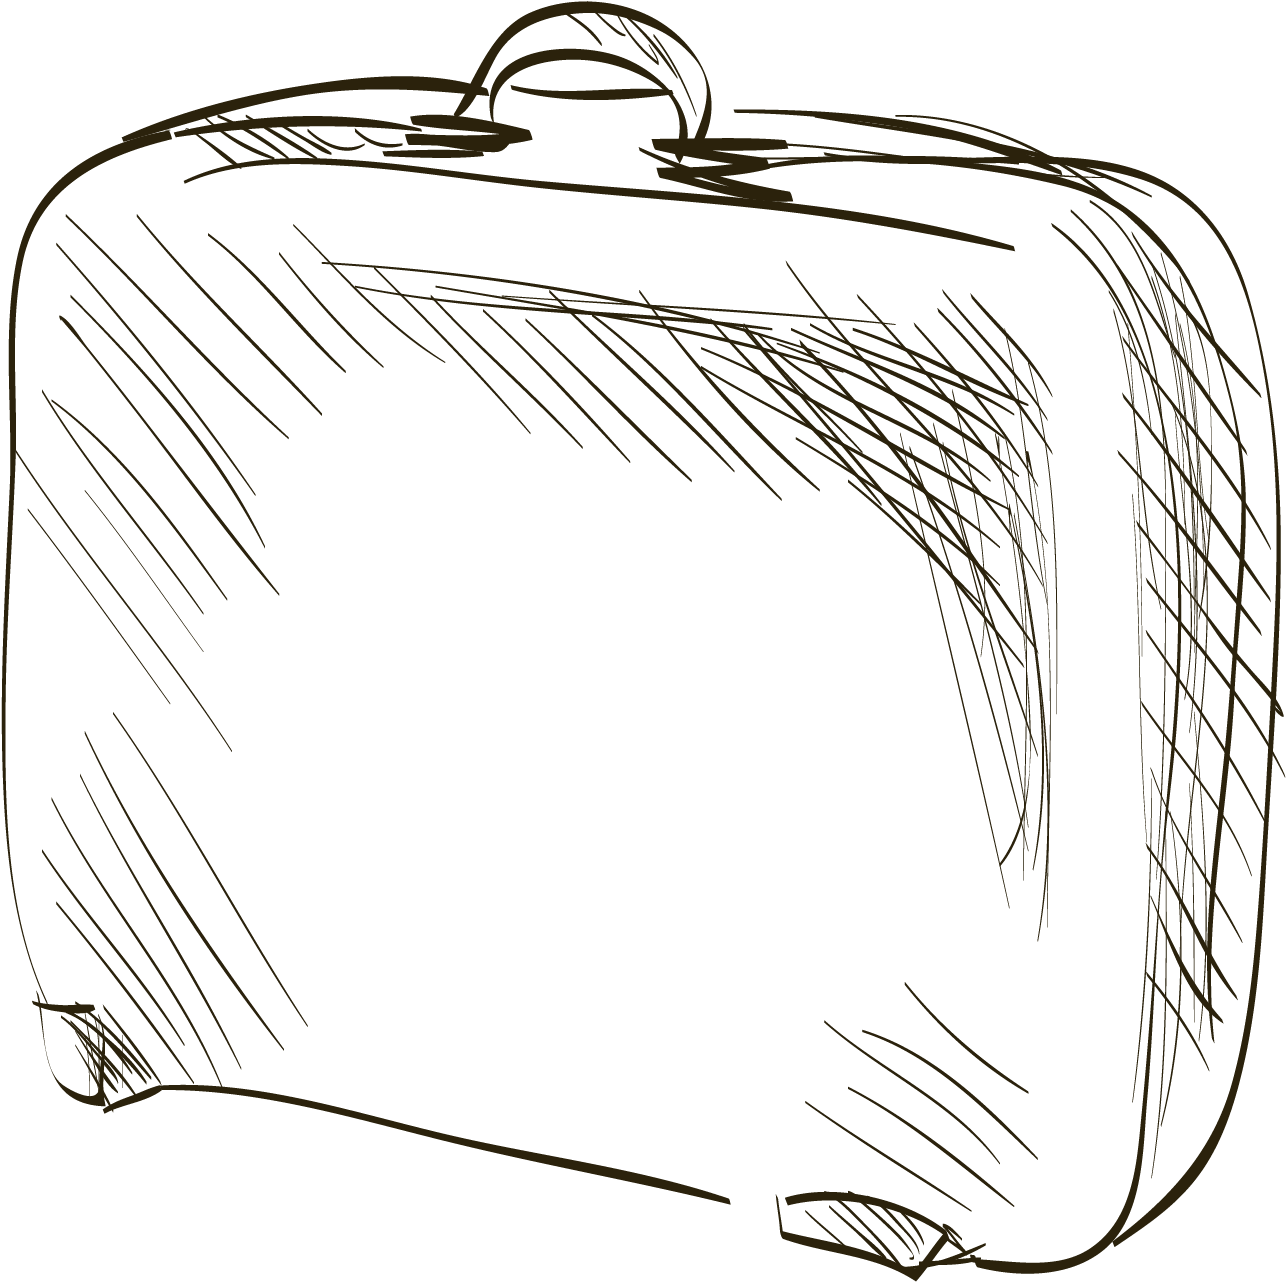 luggage png - Luggage Vector Suitcase - Suitcase Drawing Transparent  Background | #933453 - Vippng